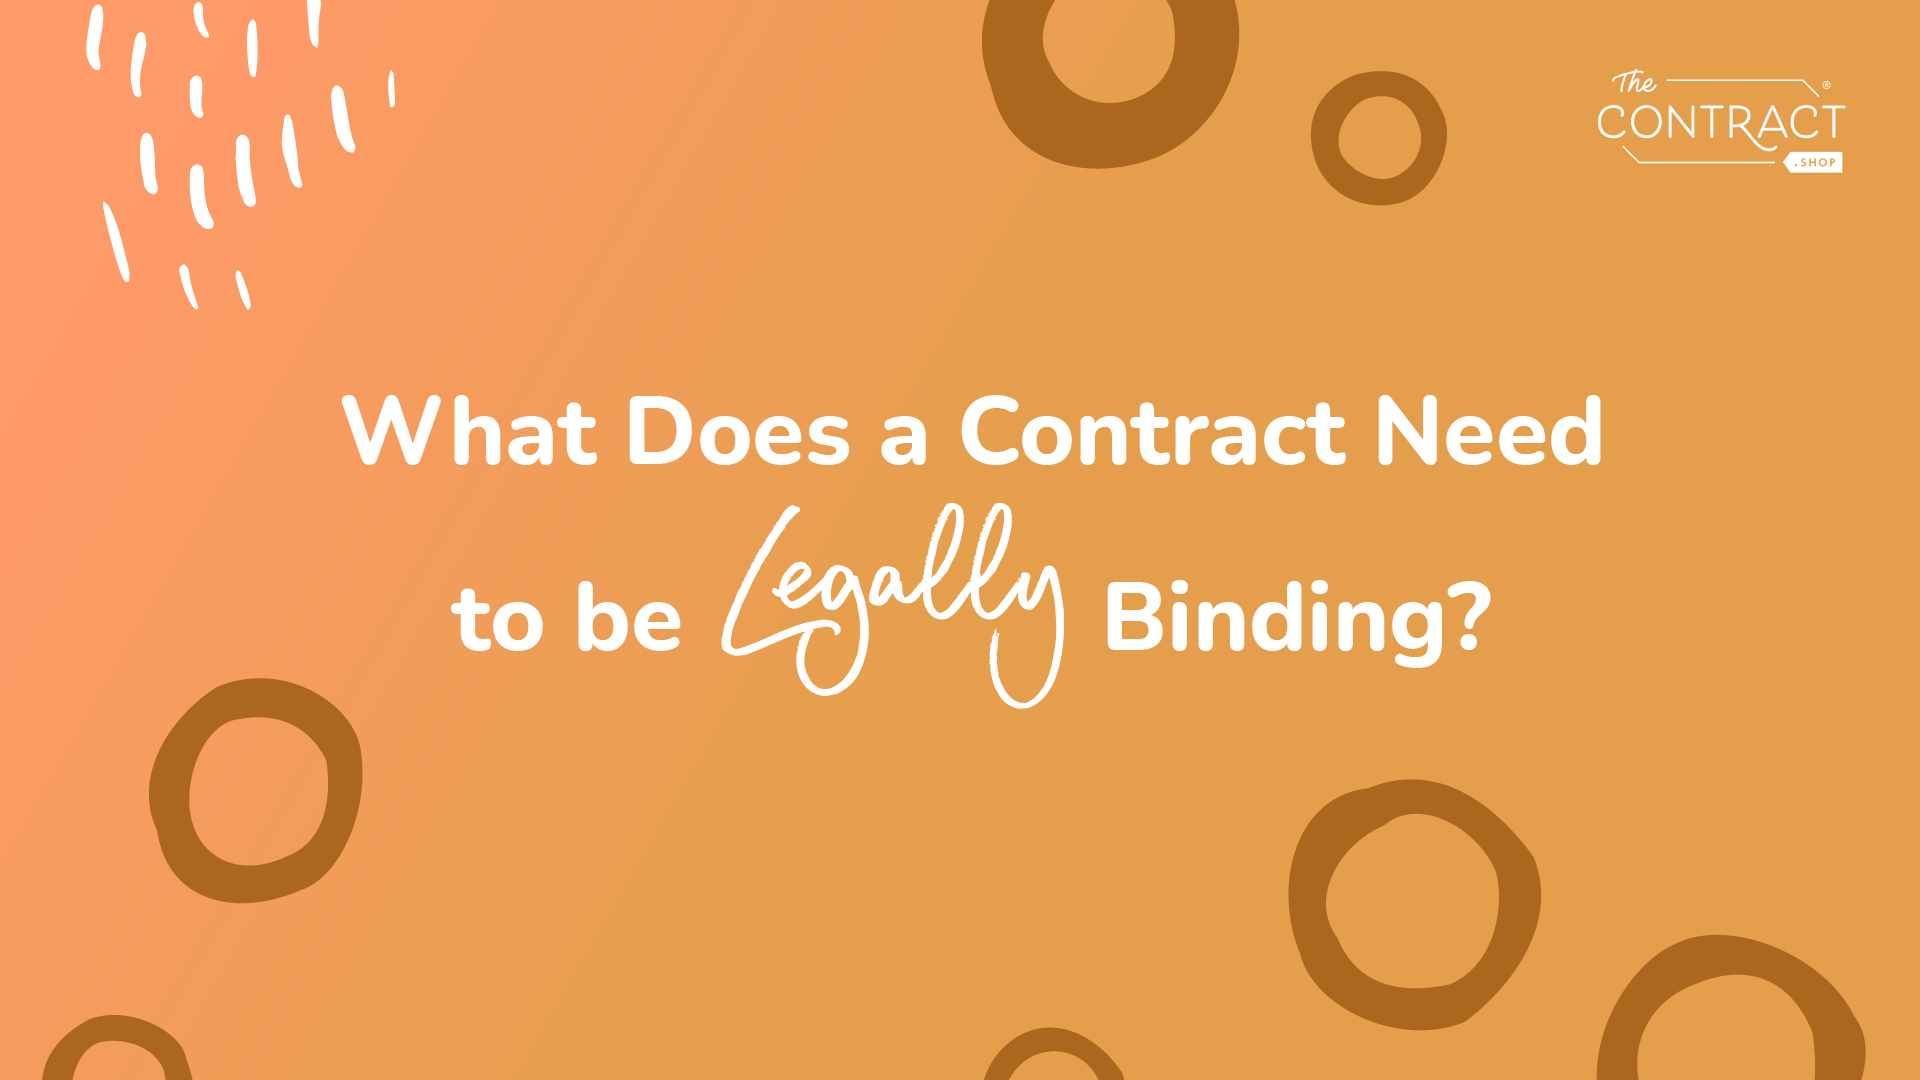 What Does a Contract Need to be Legally Binding?